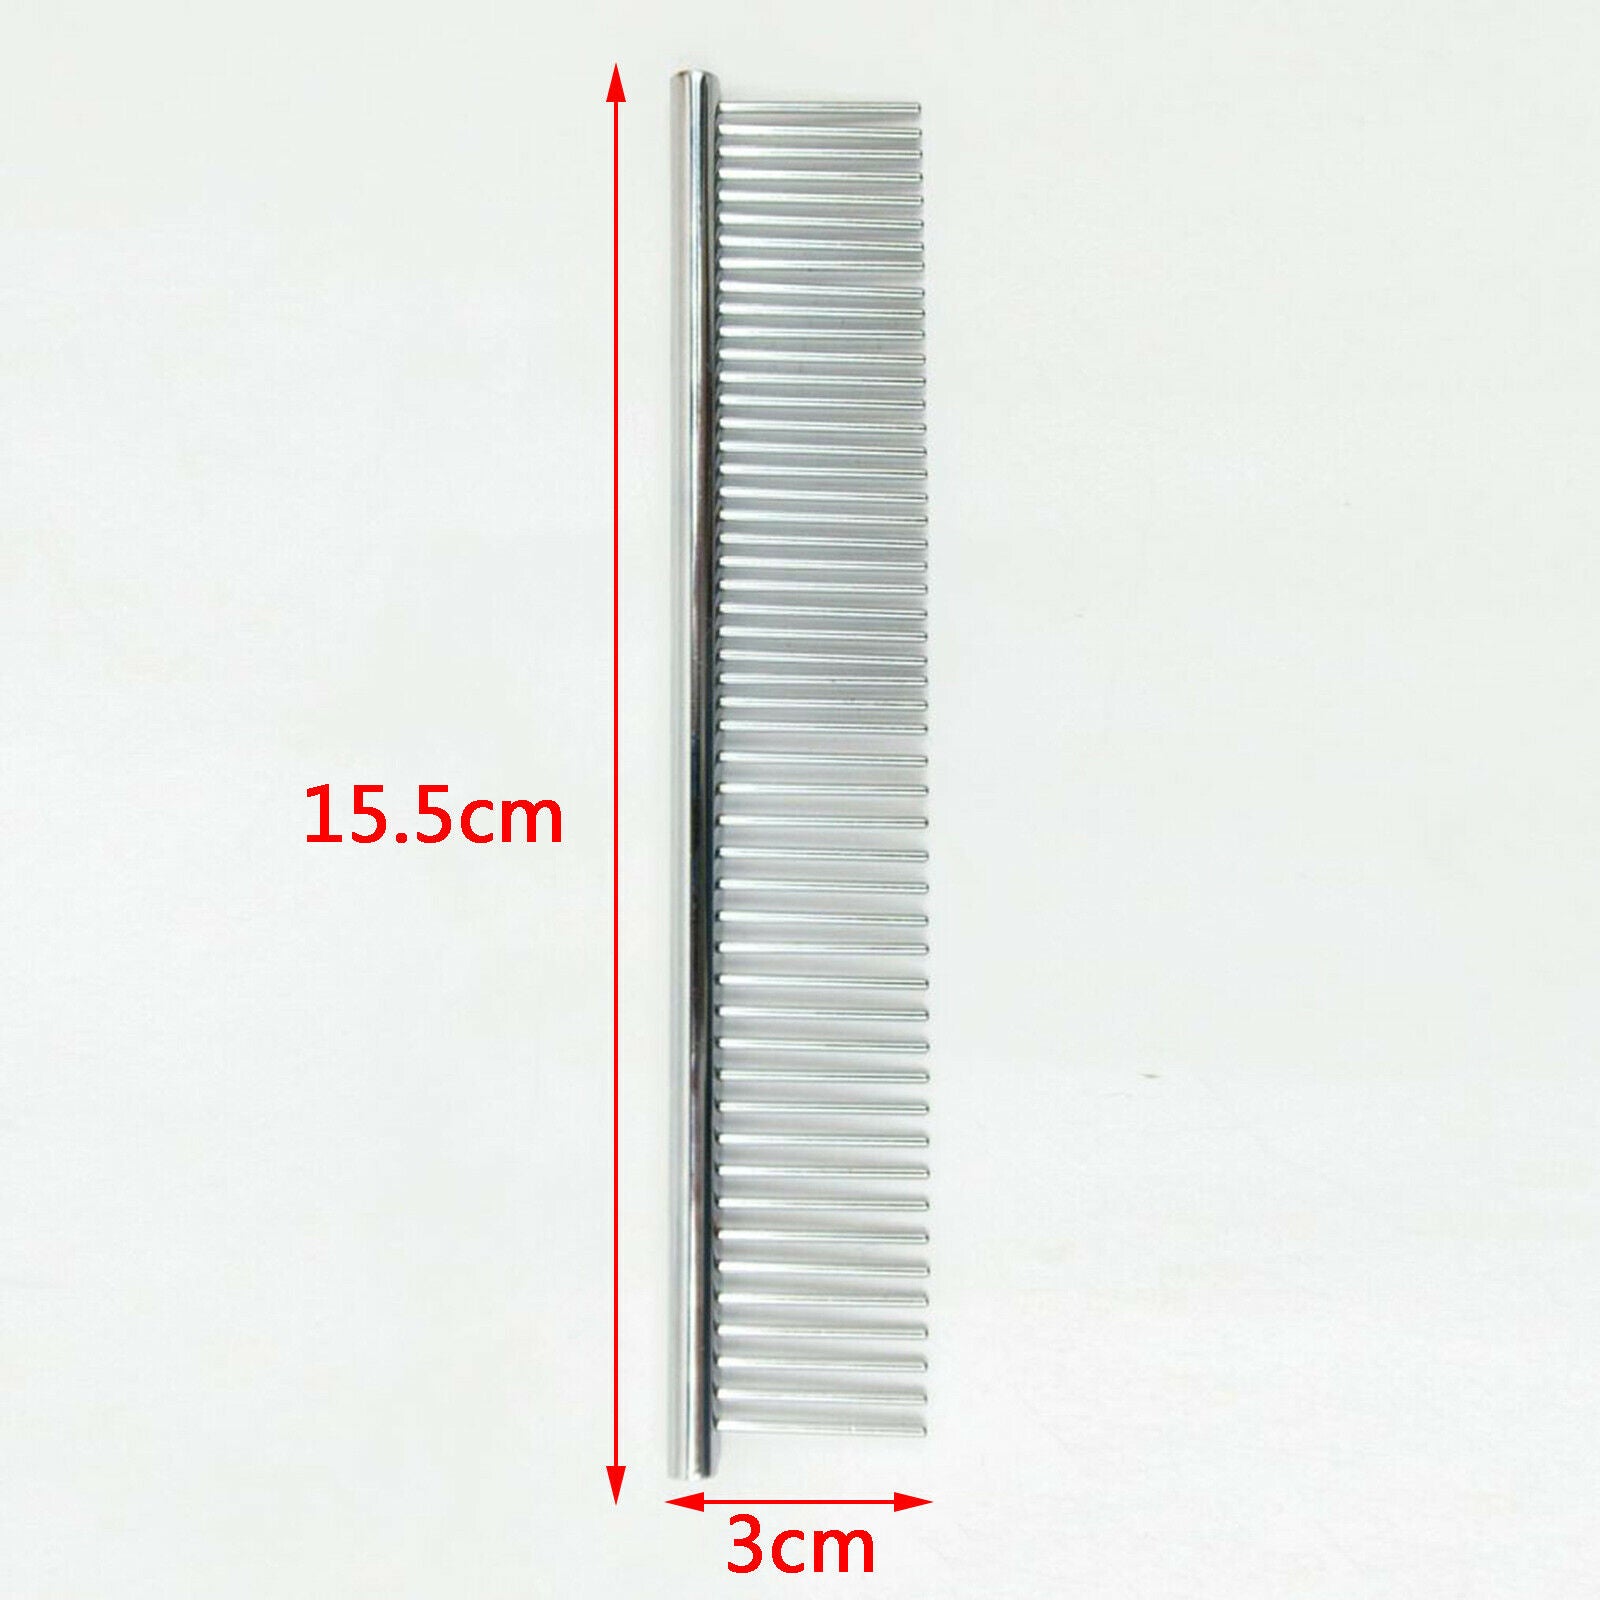 Anti-static Stainless Steel Macrame Fringe Comb Professional Knotting Tools